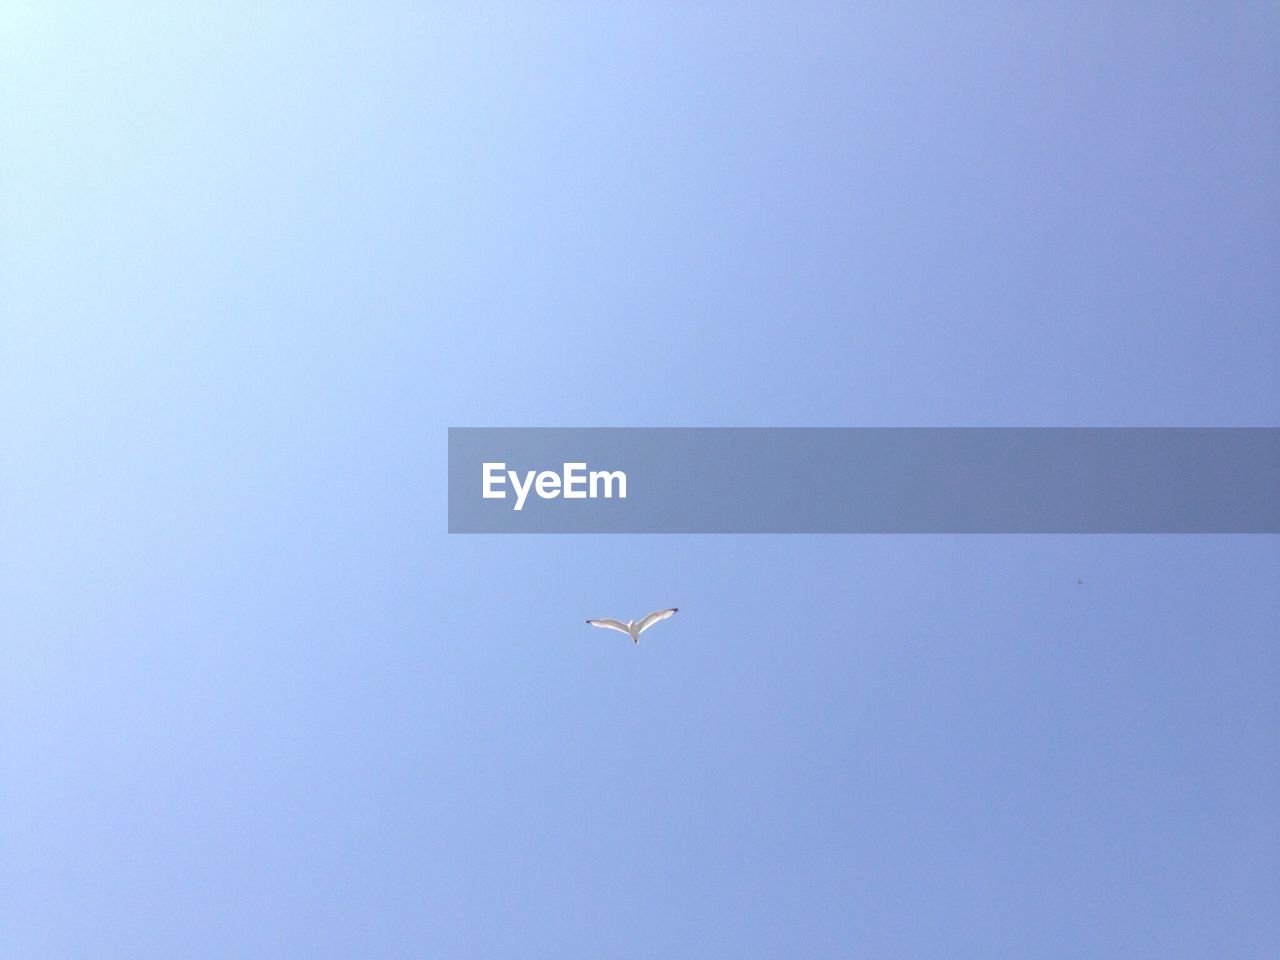 LOW ANGLE VIEW OF BIRD FLYING IN SKY